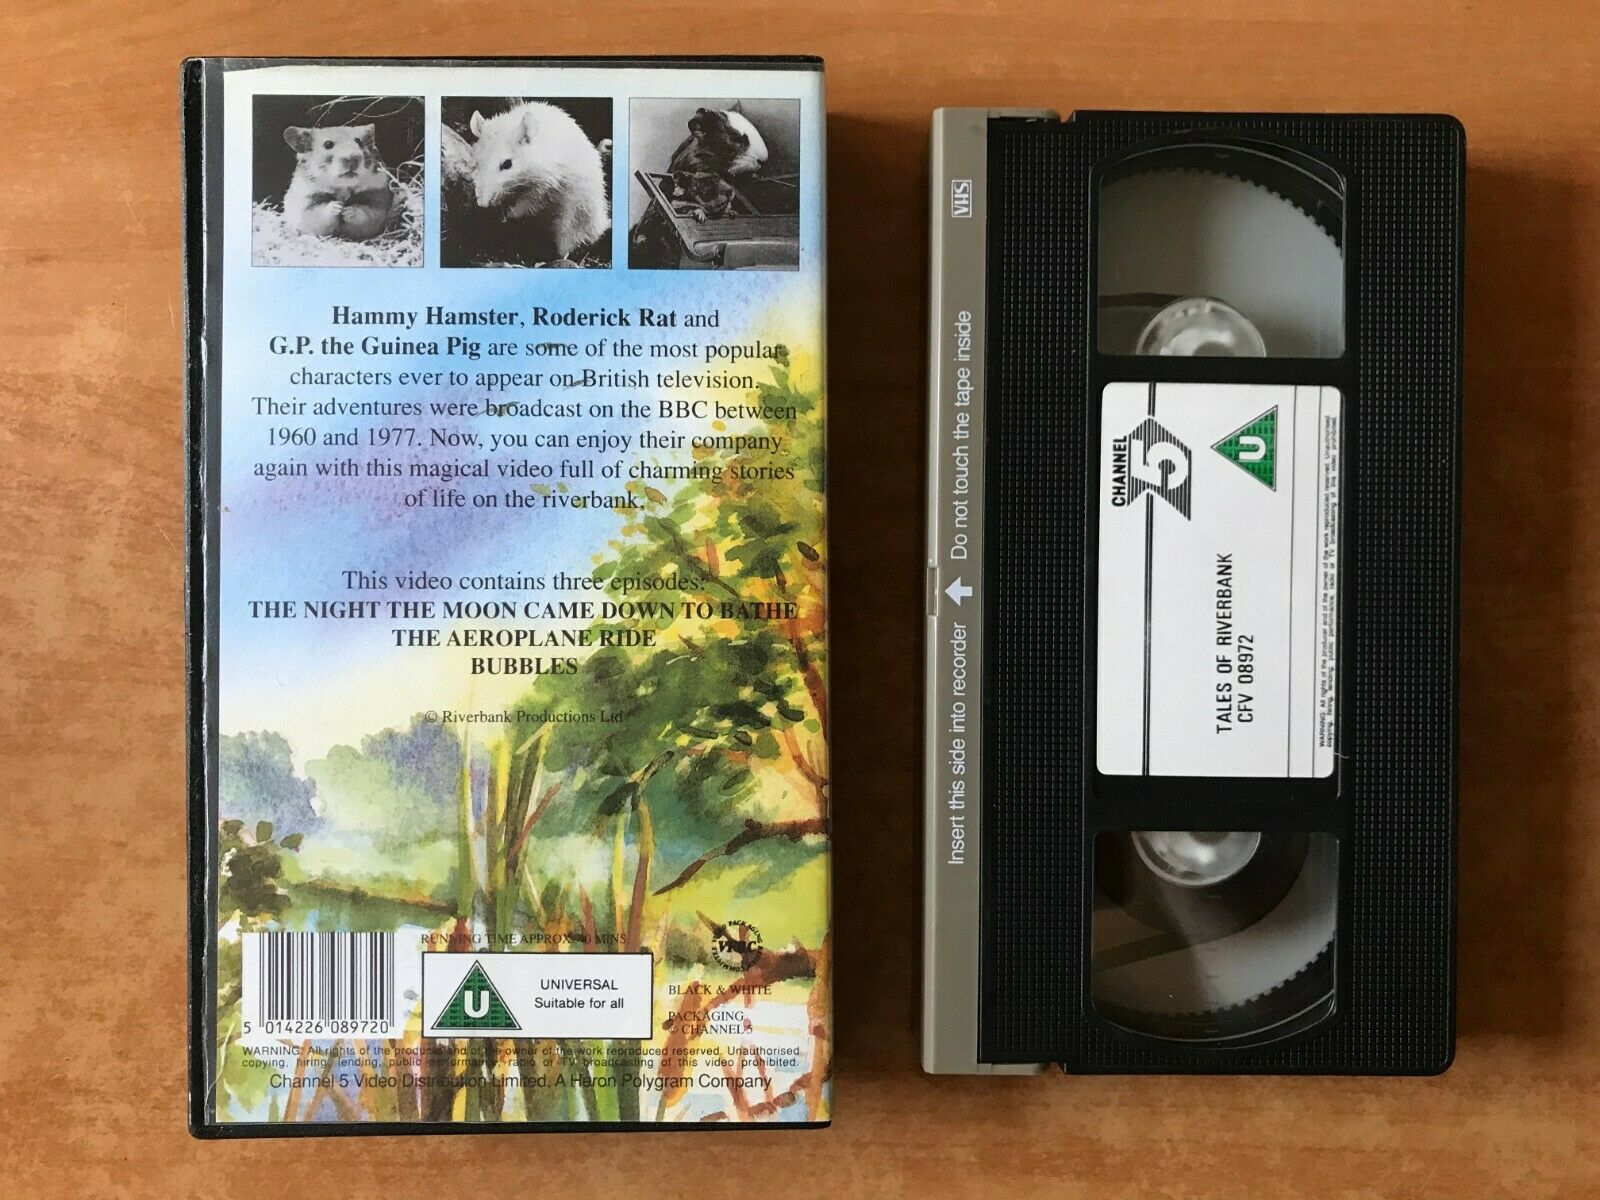 Tales Of The Riverbank; [Johnny Morris]: The Areoplane Ride - Children's - VHS-